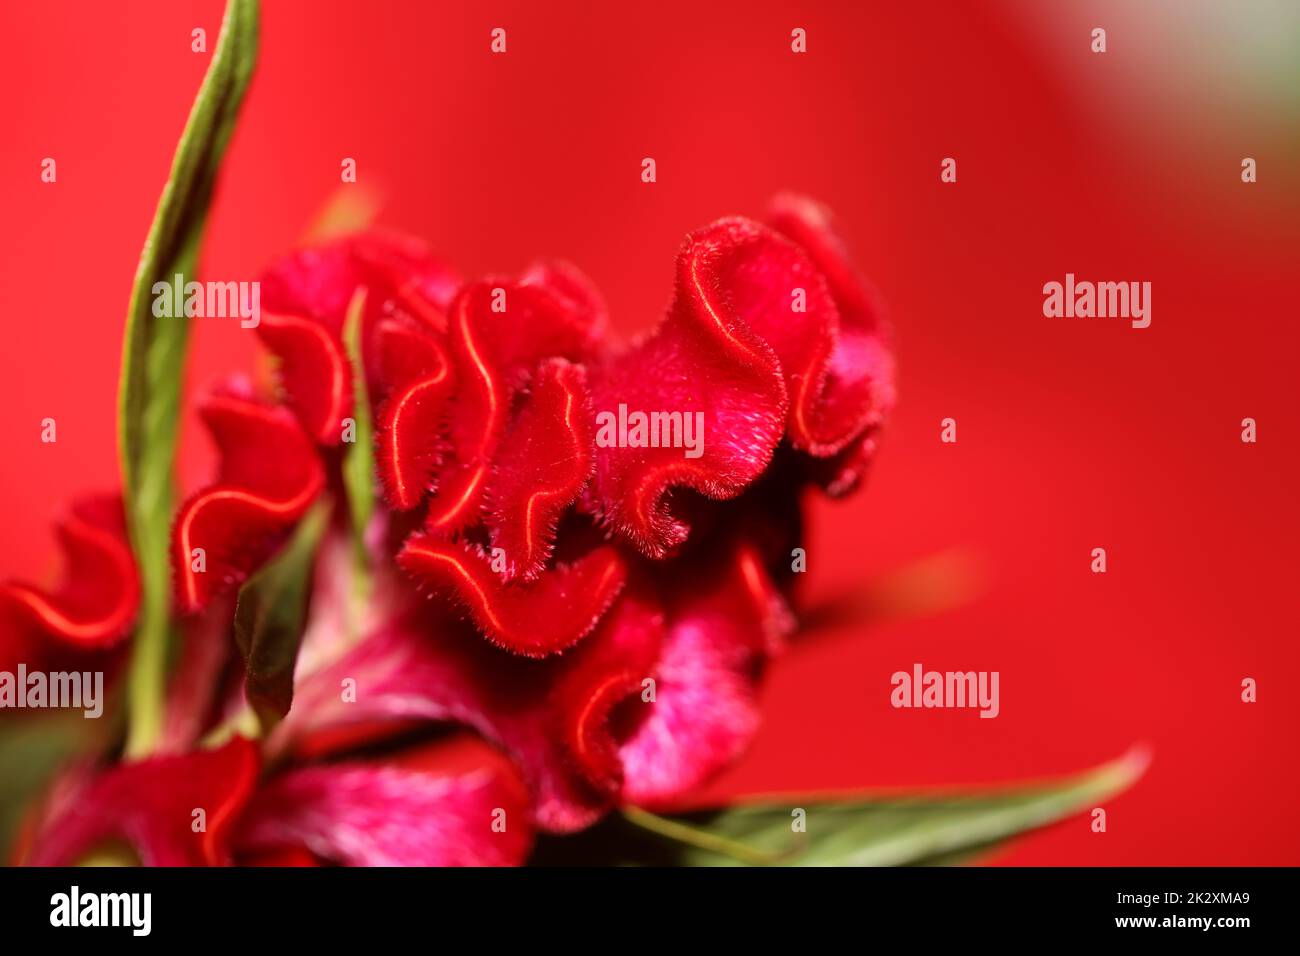 Red flower blossom close up celosia argentea family amaranthaceae botanical background high quality big size print Stock Photo